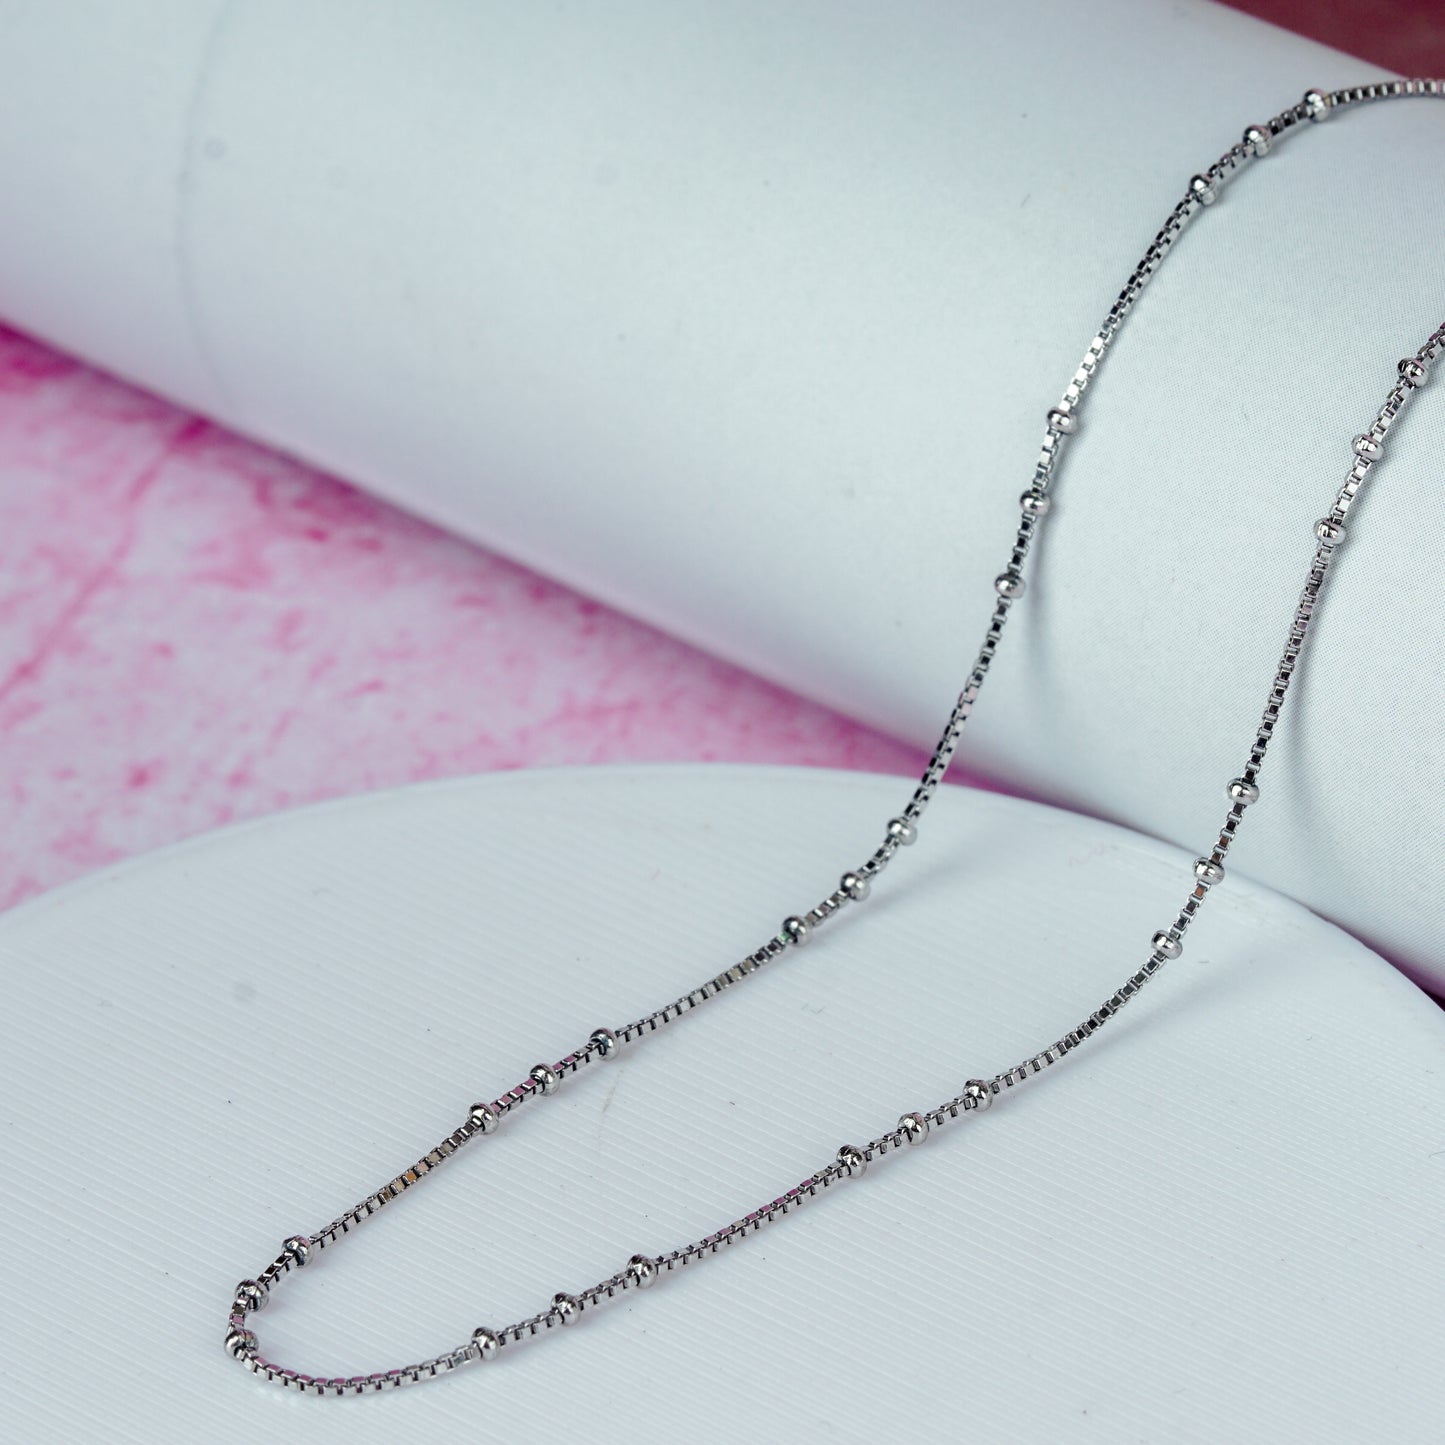 Silver Sterling Simplicity Chain